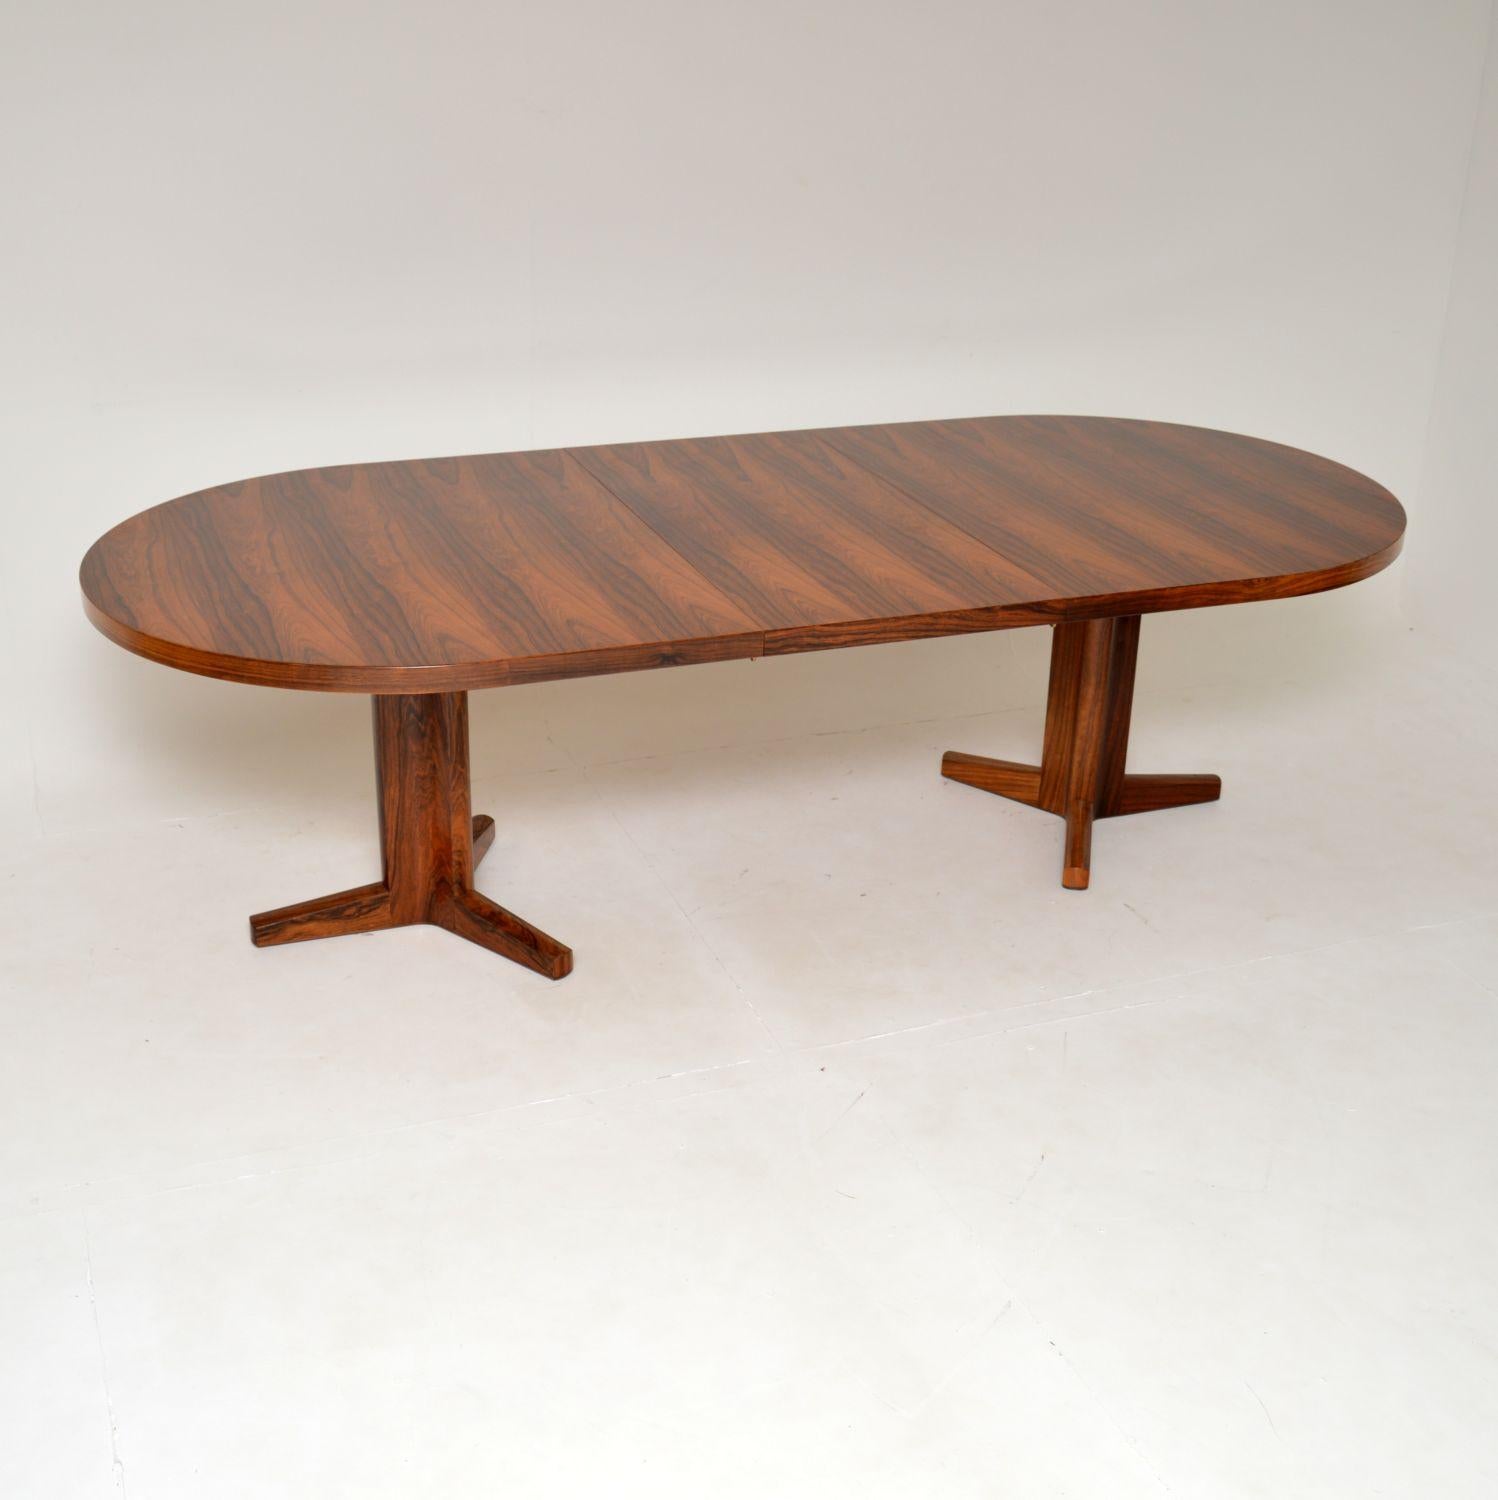 An extremely rare, very large and incredibly well made dining table. This was designed by Martin Hall for the Gordon Russell Marwood range. This is actually a limited edition design, and this is number 2 of only 200 ever made.

It has two leaves